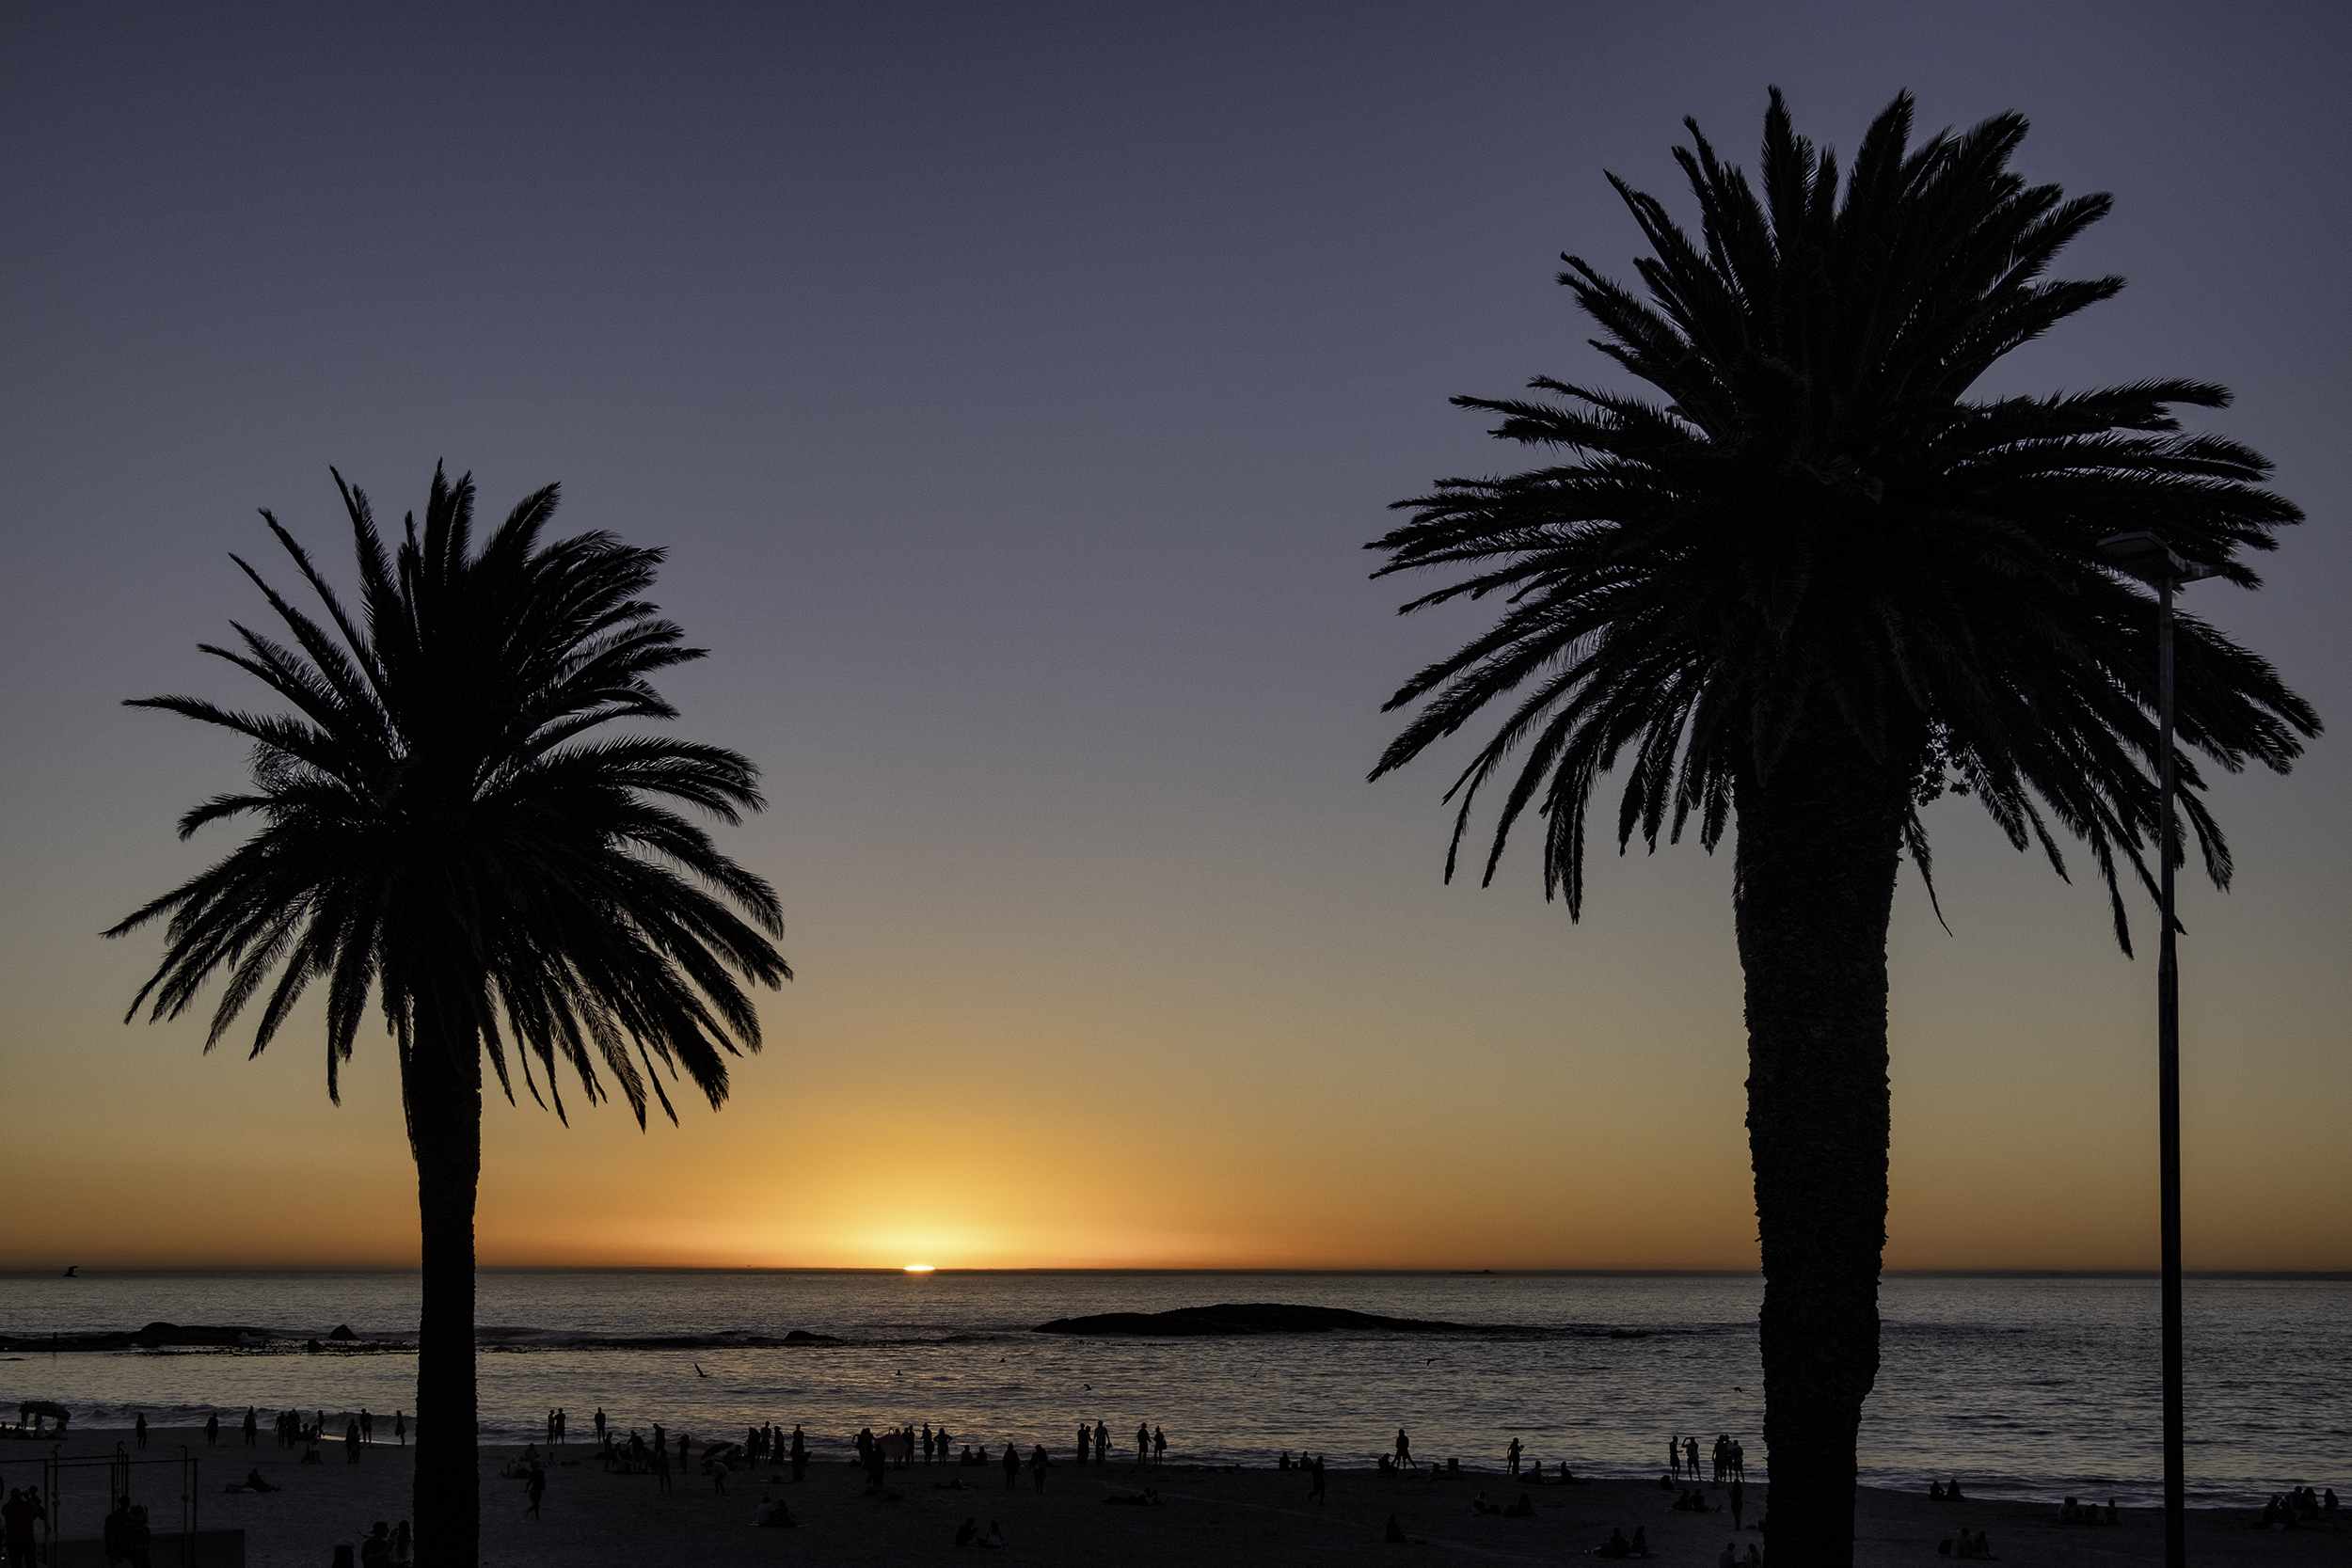 Camps Bay Sunset, Cape Town, SA